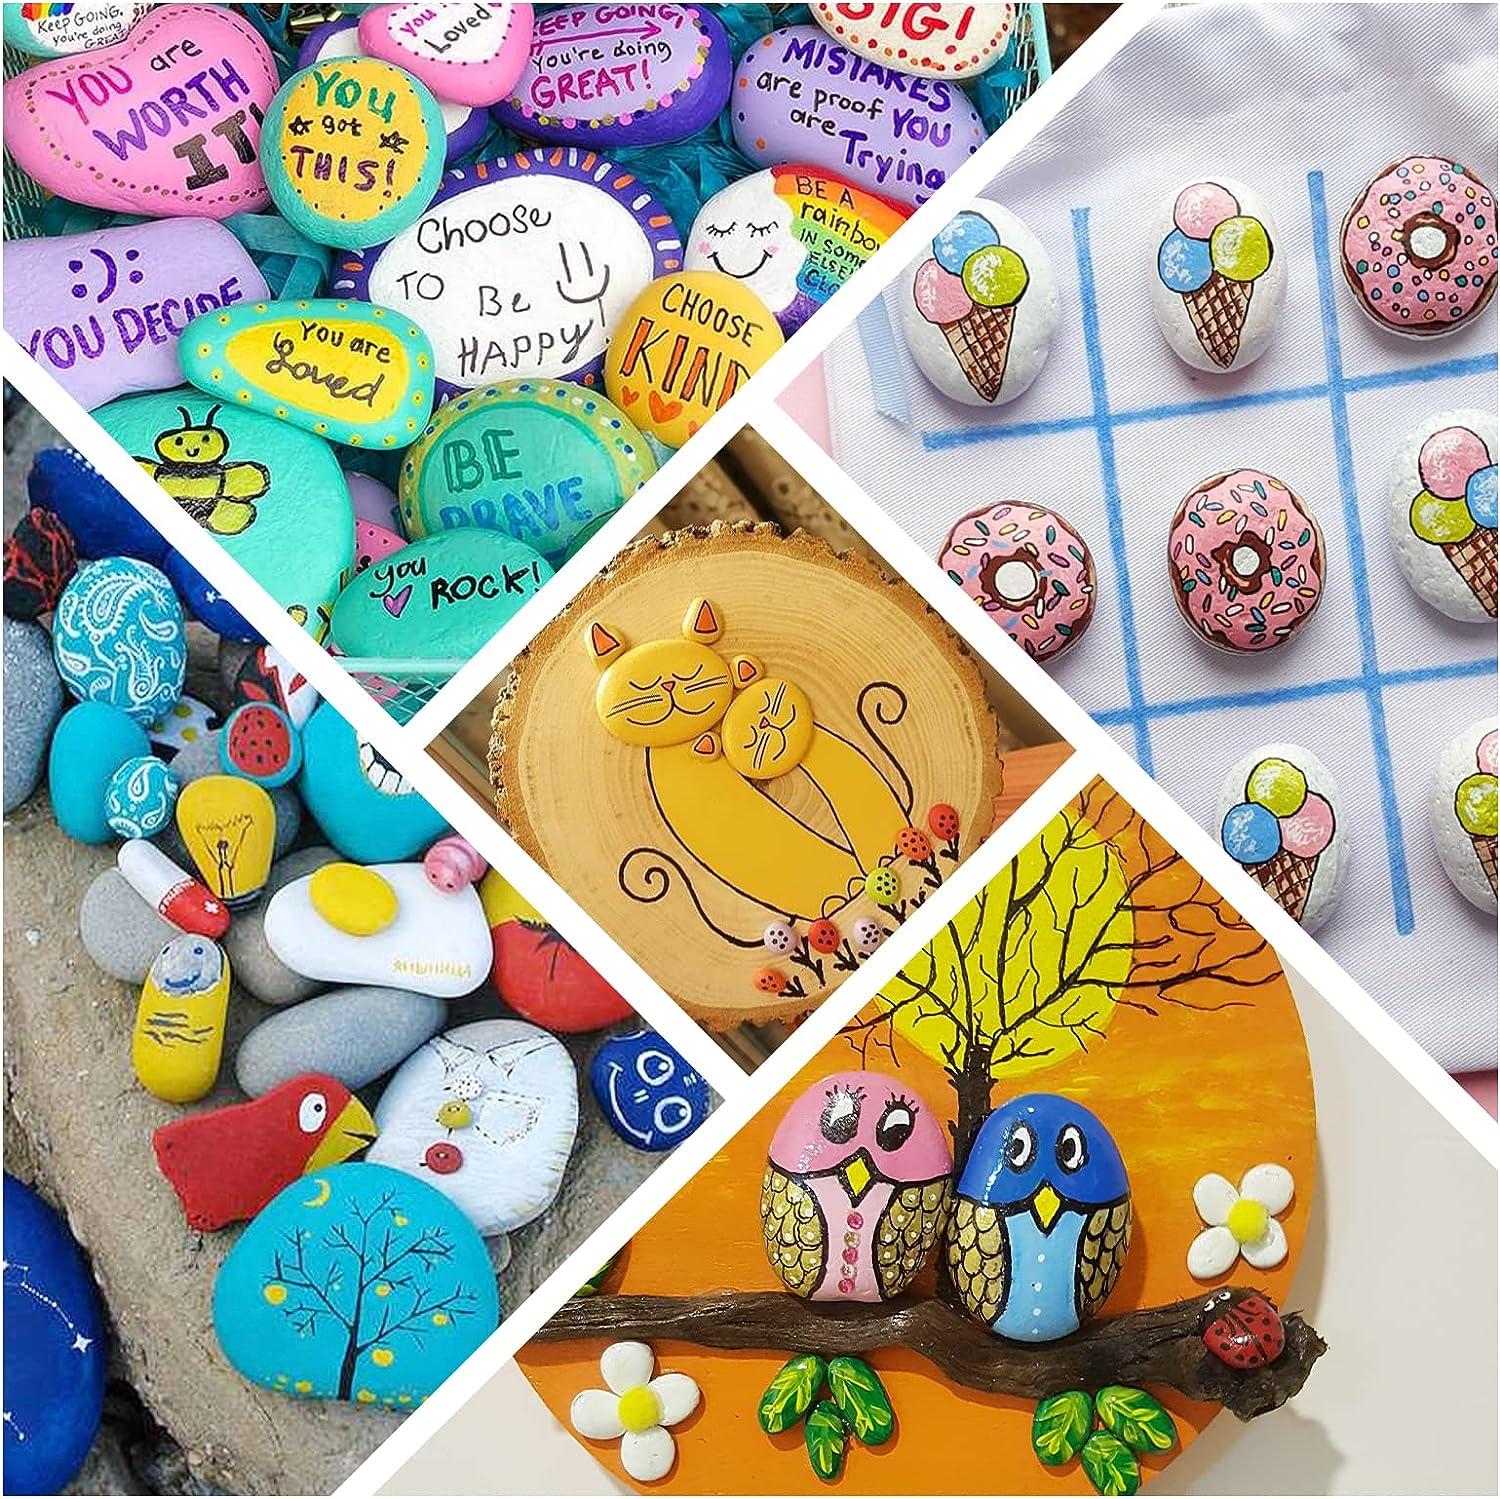 Simetufy 25 Pcs River Rocks for Painting, 2-3 Painting Rocks, Flat &  Smooth Rocks to Paint, Hand Picked Natural Stones for Painting, Cheap  Crafts